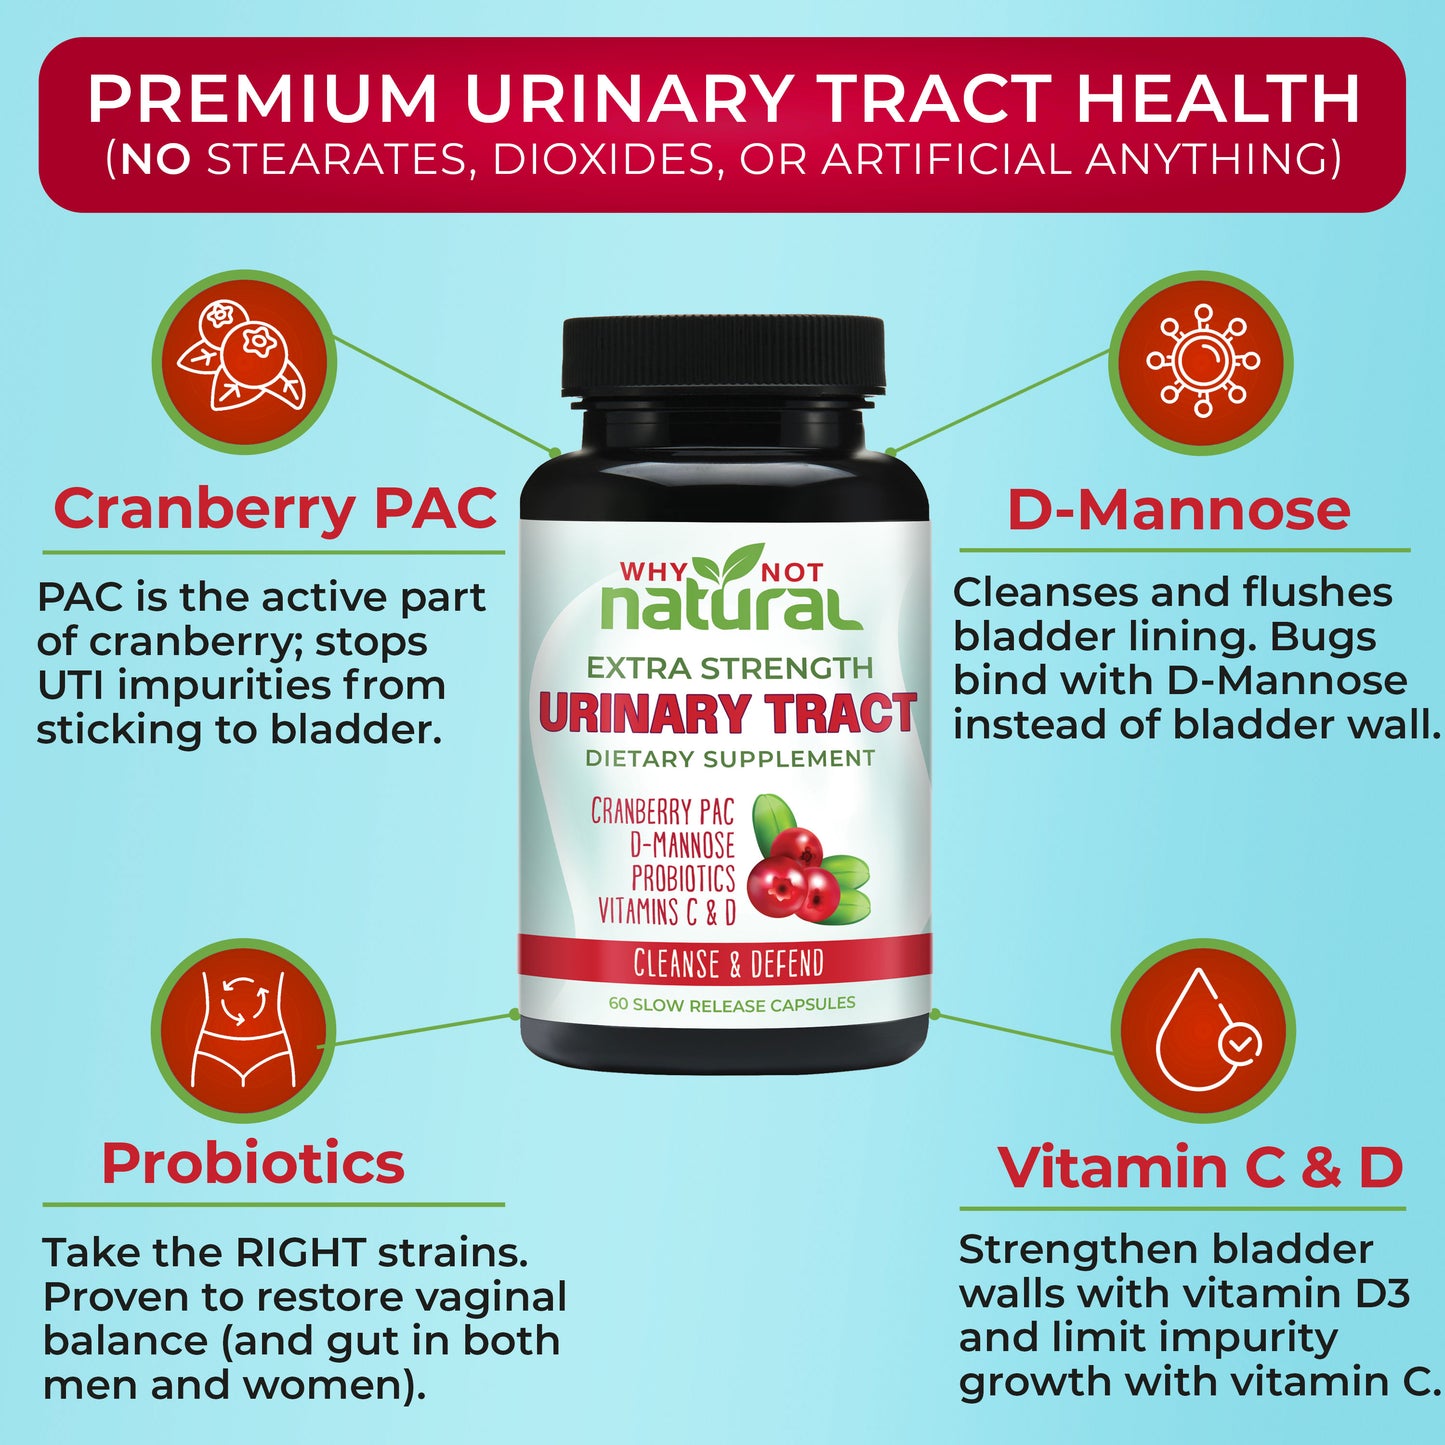 6-in-1 UTI Capsules with D Mannose, Cranberry PAC Extract, Probiotics and Vitamin C & D